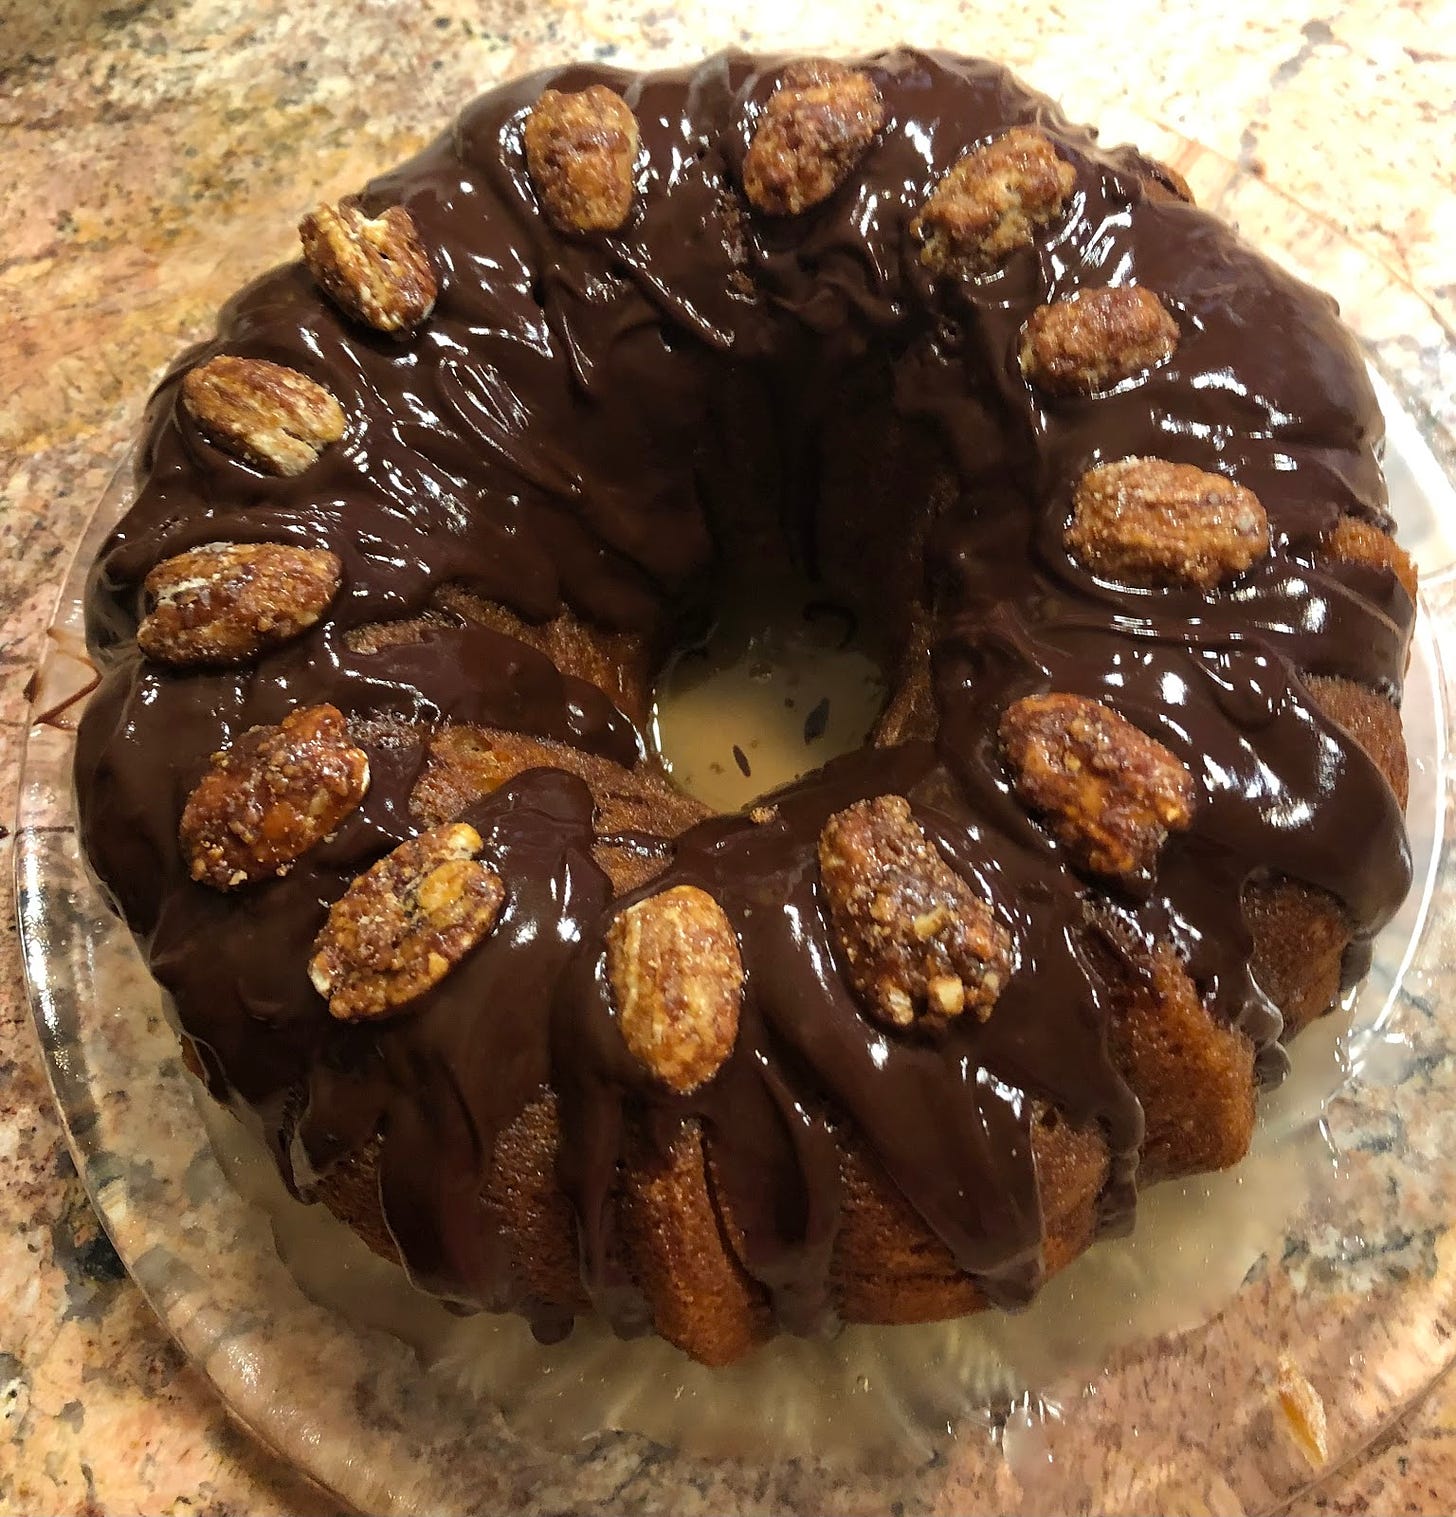 A rum cake--bundt cake with chocolate glaze and candied pecans.